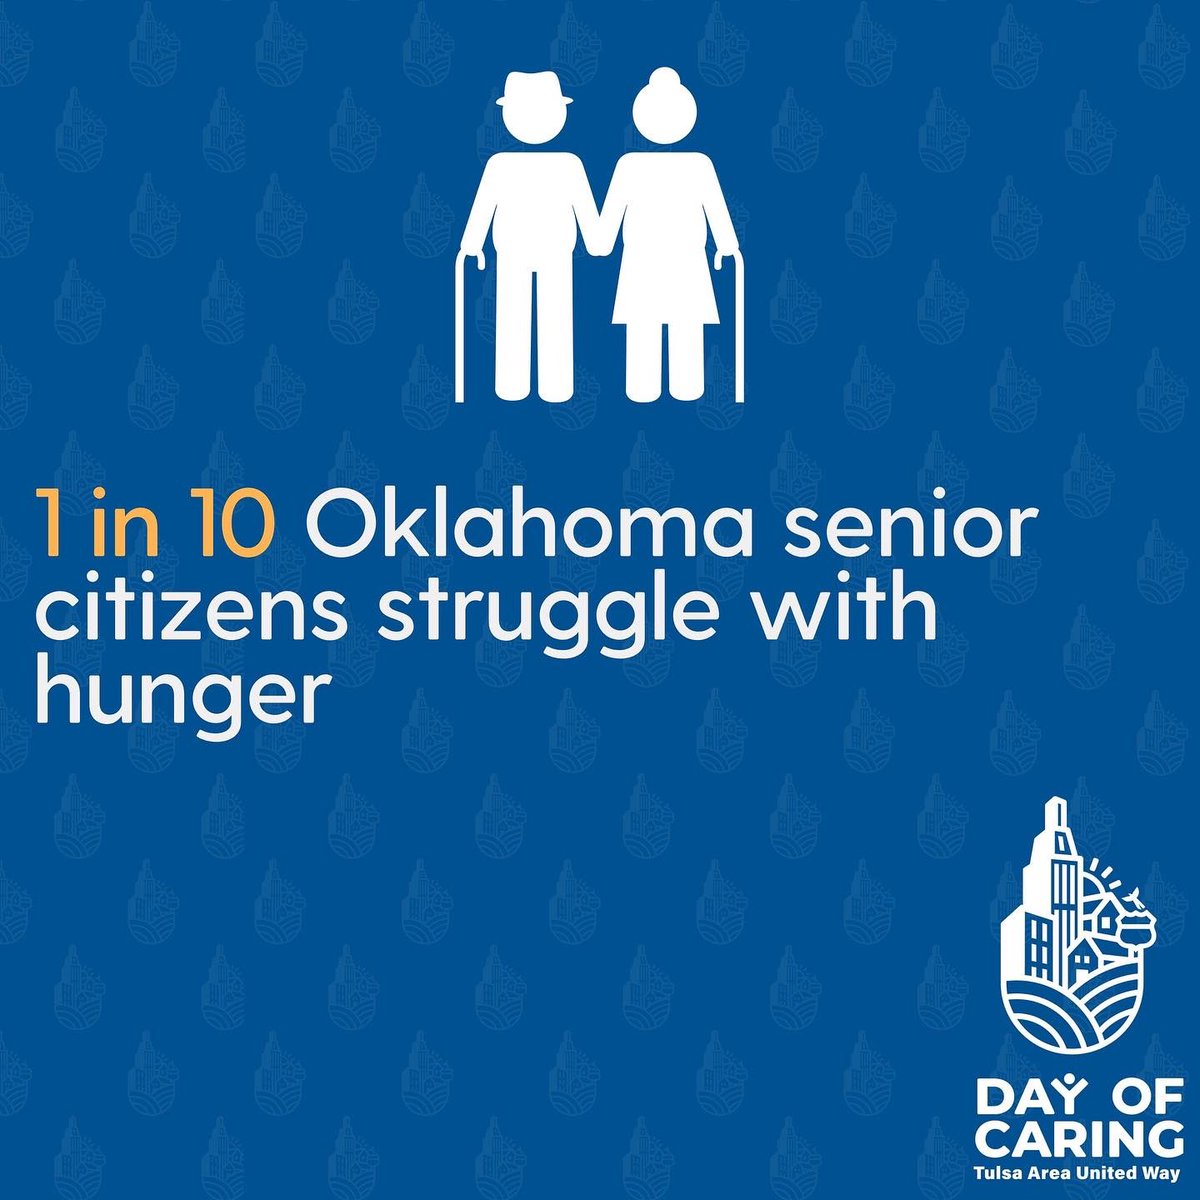 Food insecurity is impacting families across our six-county service region and the state. Check out these Food Drive #FastFacts and mark your calendar for June 24! Donations benefit @okfoodbank & United Way partner agencies. Find a location near you at tauw.org/fooddrive! 💙